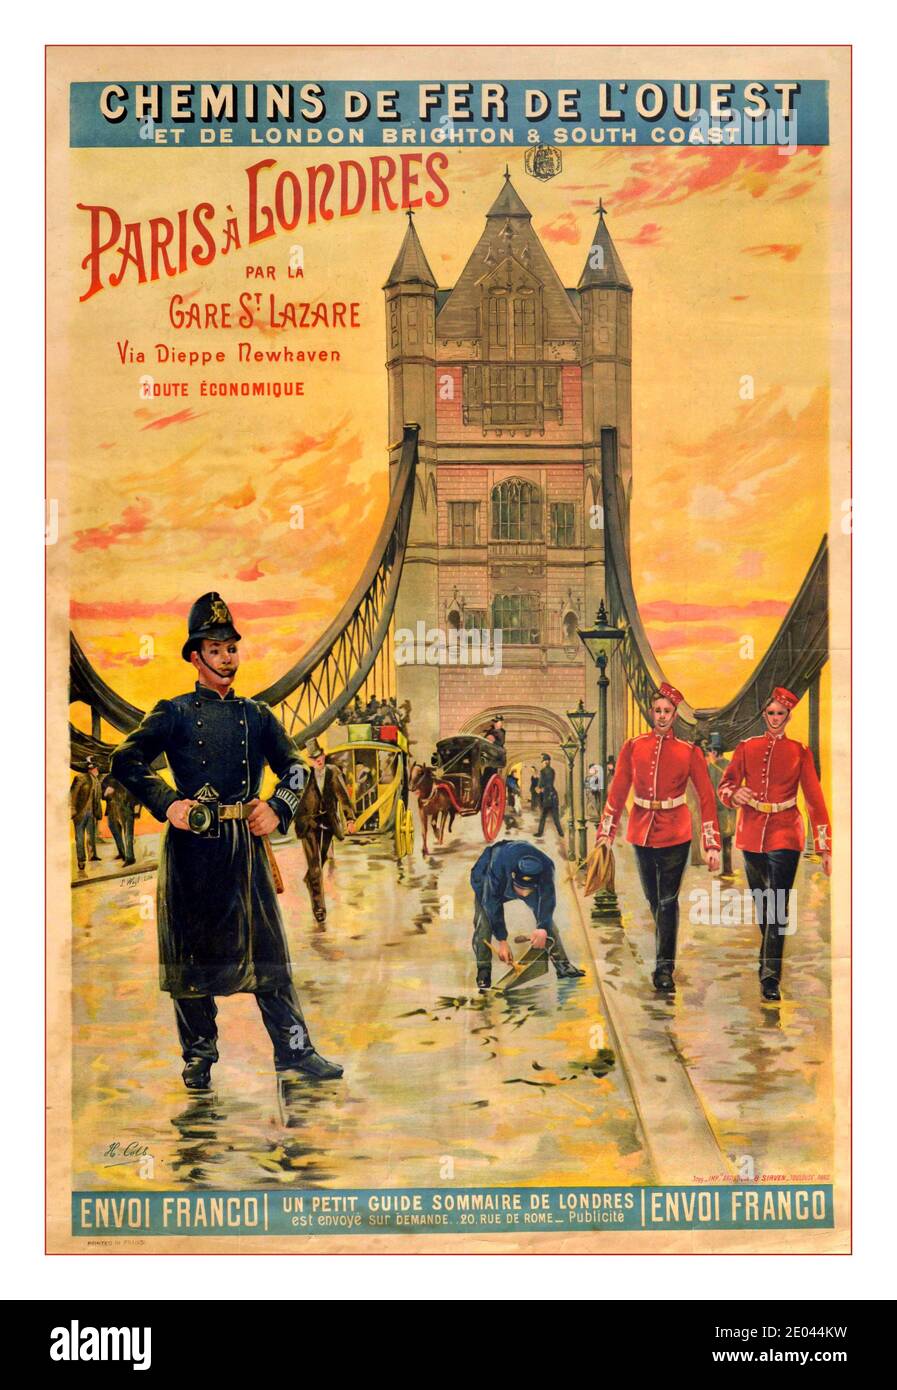 VINTAGE 1900’s TRAVEL POSTER RAILROADS OF PARIS TO LONDON Original vintage travel poster for chemins de fer de l’ouest  Railroads from Paris to London by Gare St Lazare via Dieppe Newhaven Economic Route issued by Western and London Brighton and South Coast Railways - design features a British policeman wearing a traditional police helmet and long coat uniform with Royal guards and horse and carriages travelling over Tower Bridge in London. Country of issue: France, designer: H. Colb, year of printing: 1900s Stock Photo